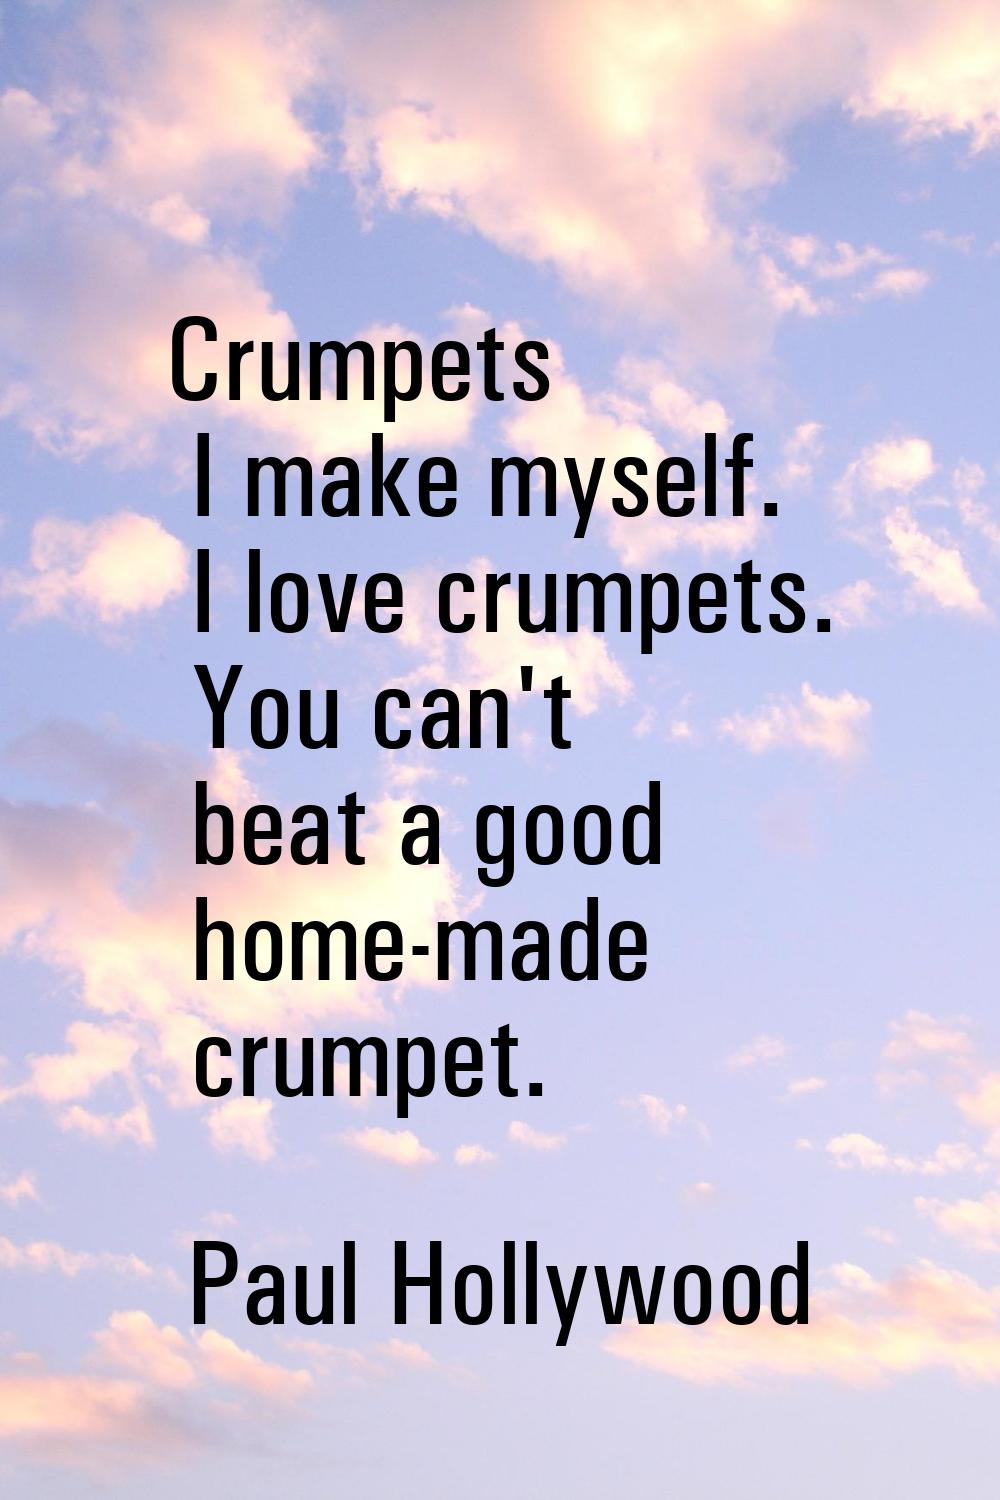 Crumpets I make myself. I love crumpets. You can't beat a good home-made crumpet.